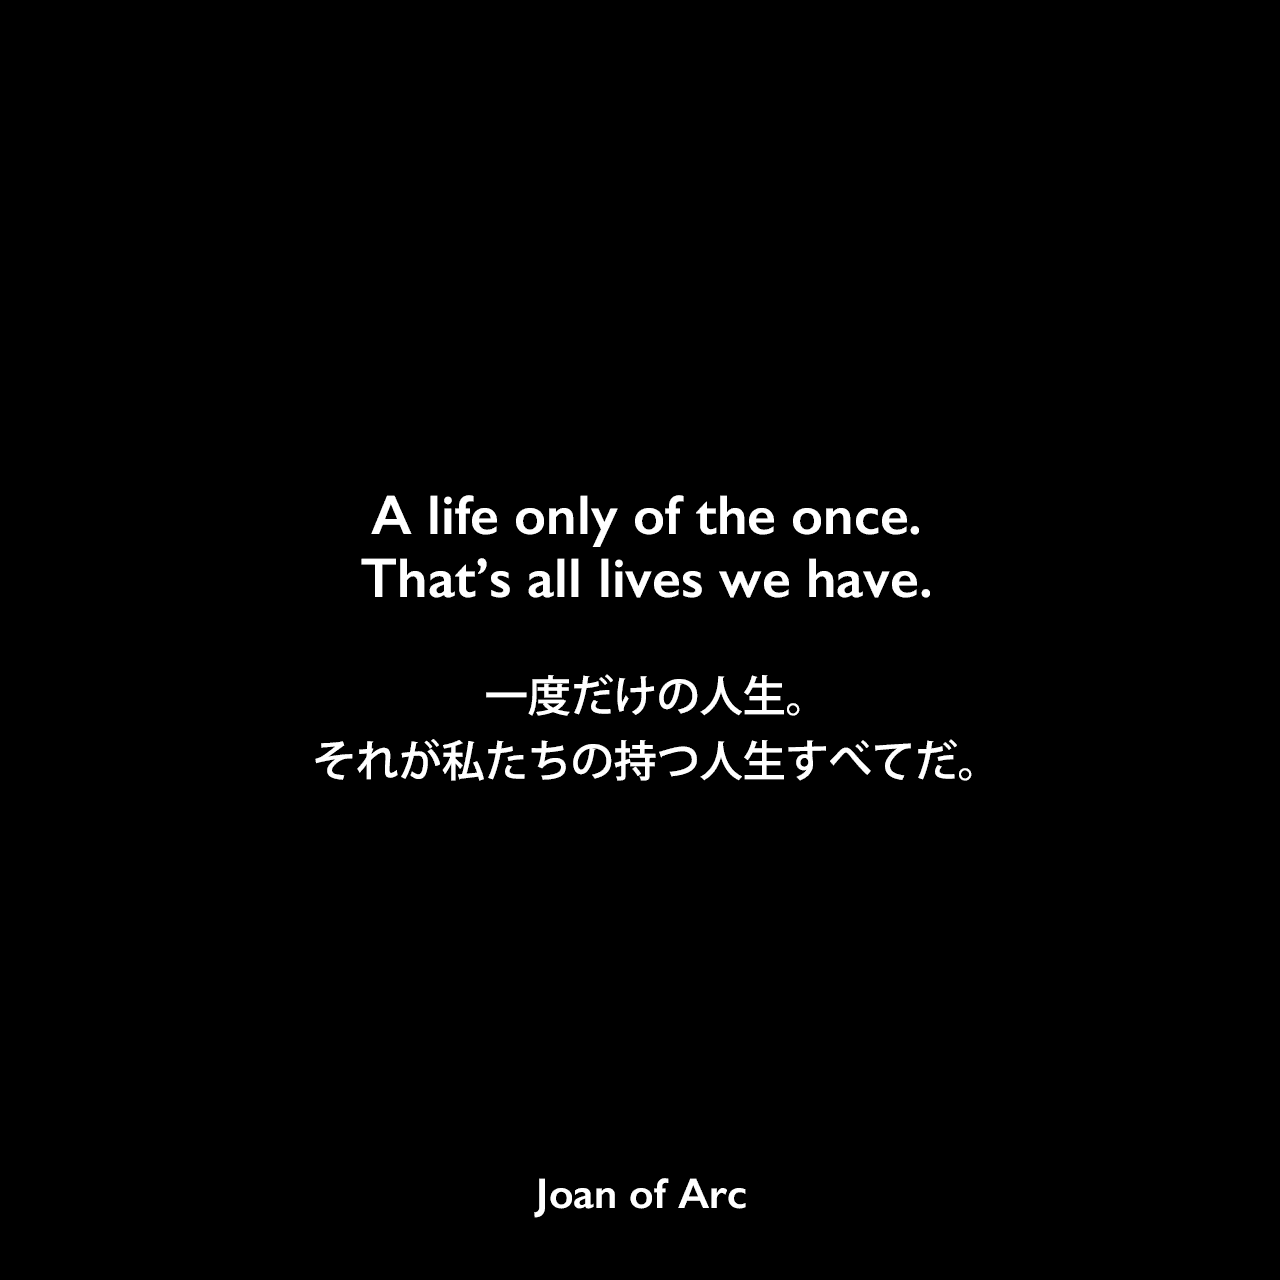 A life only of the once. That’s all lives we have.一度だけの人生。それが私たちの持つ人生すべてだ。Joan of Arc